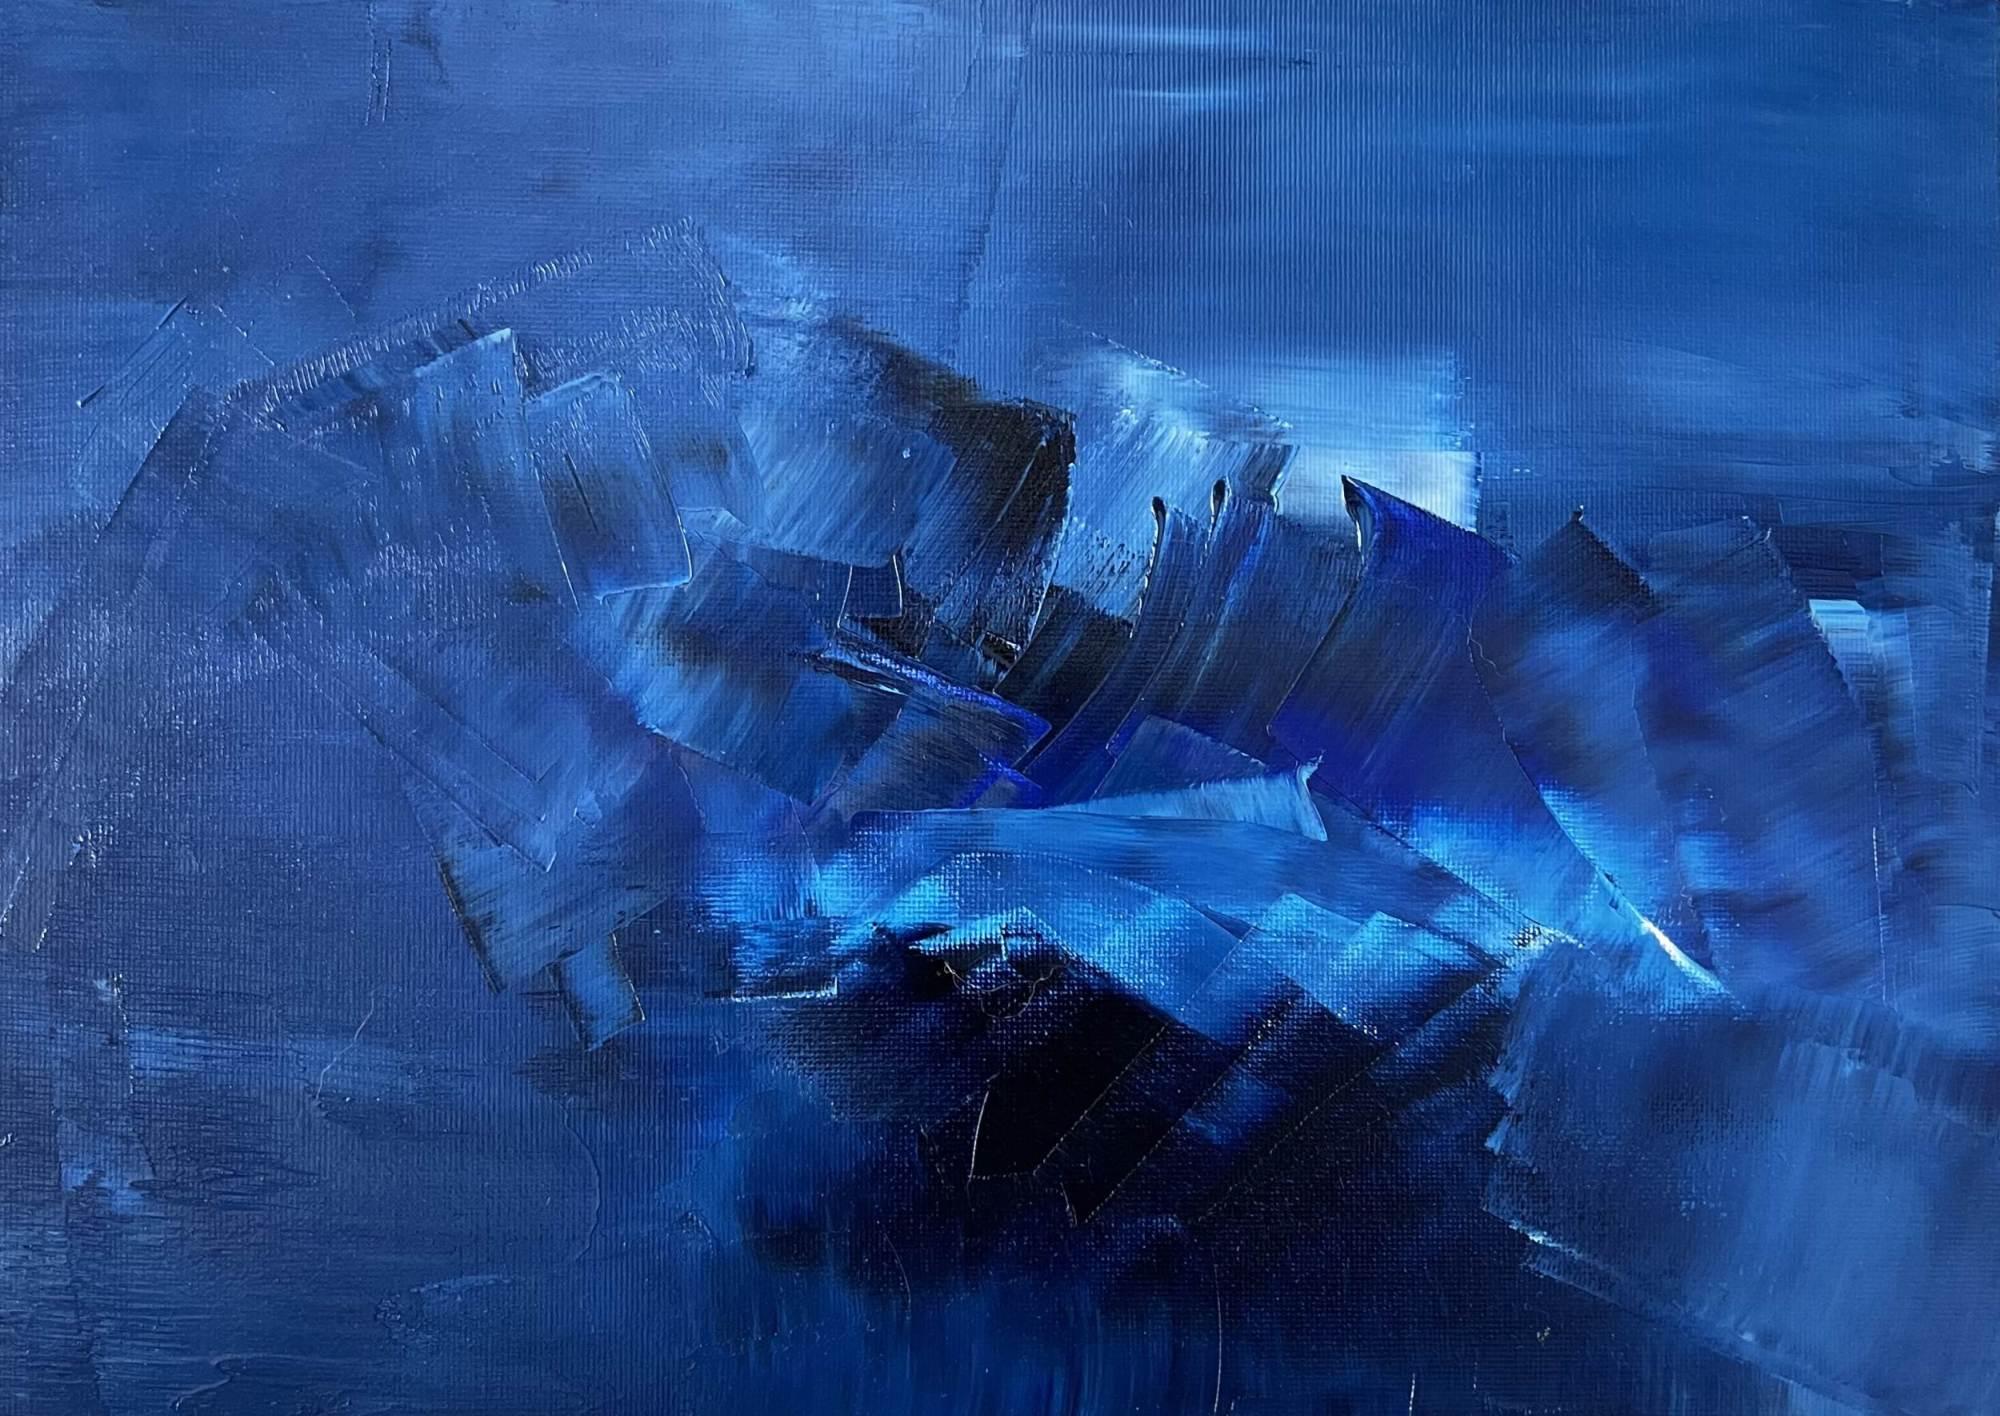 Blue Dream Landscape 02 - Abstract Expressionist Painting by Juan Jose Garay